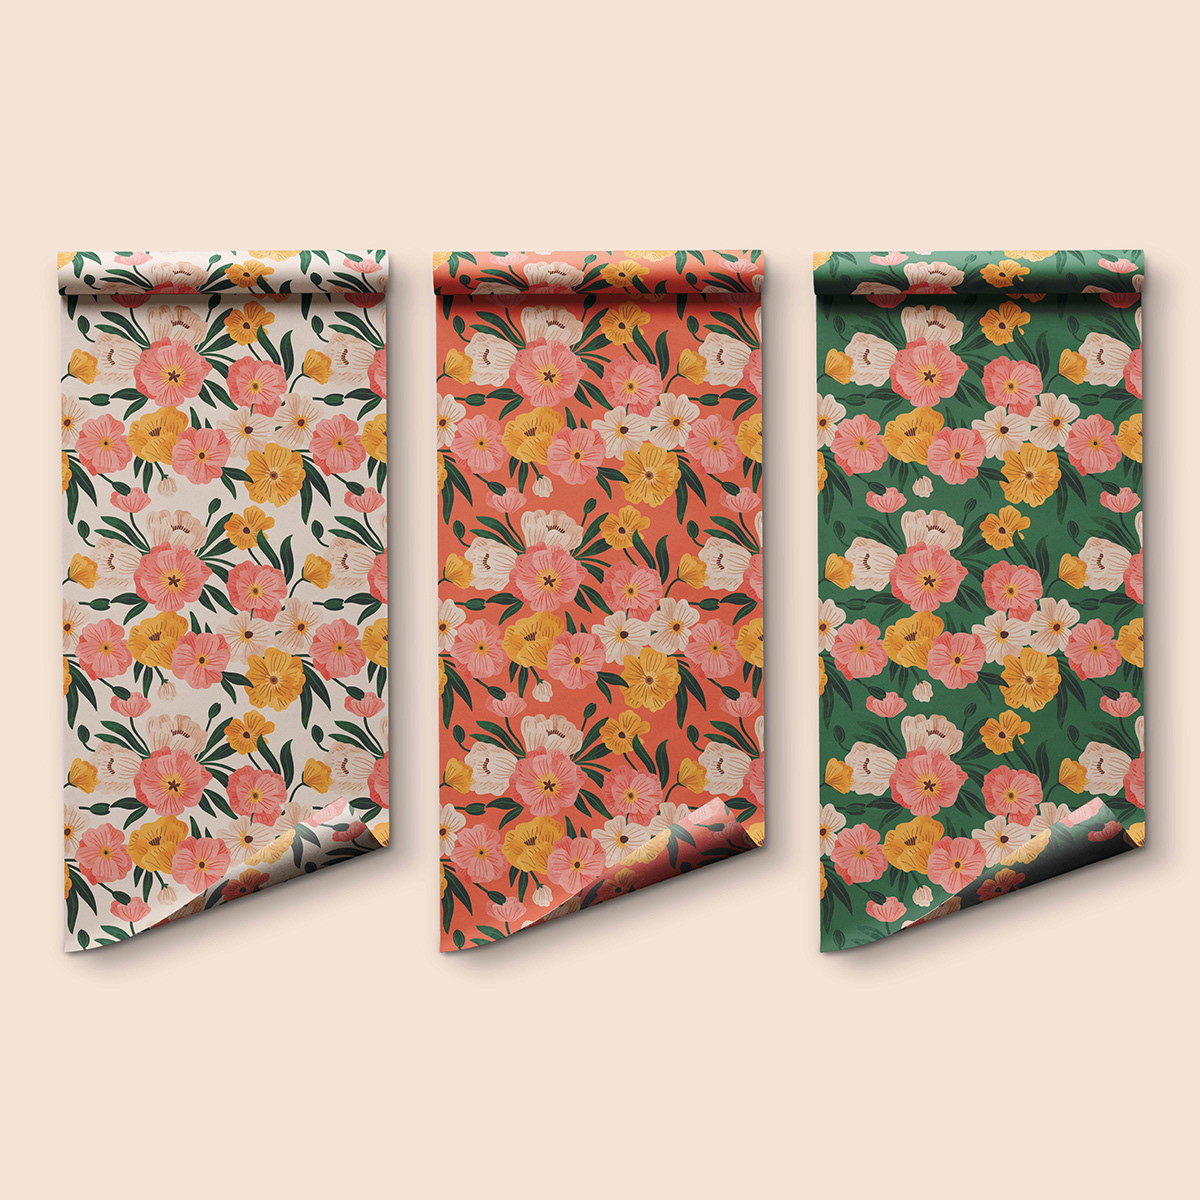 Wrapping paper with floral watercolor pattern.